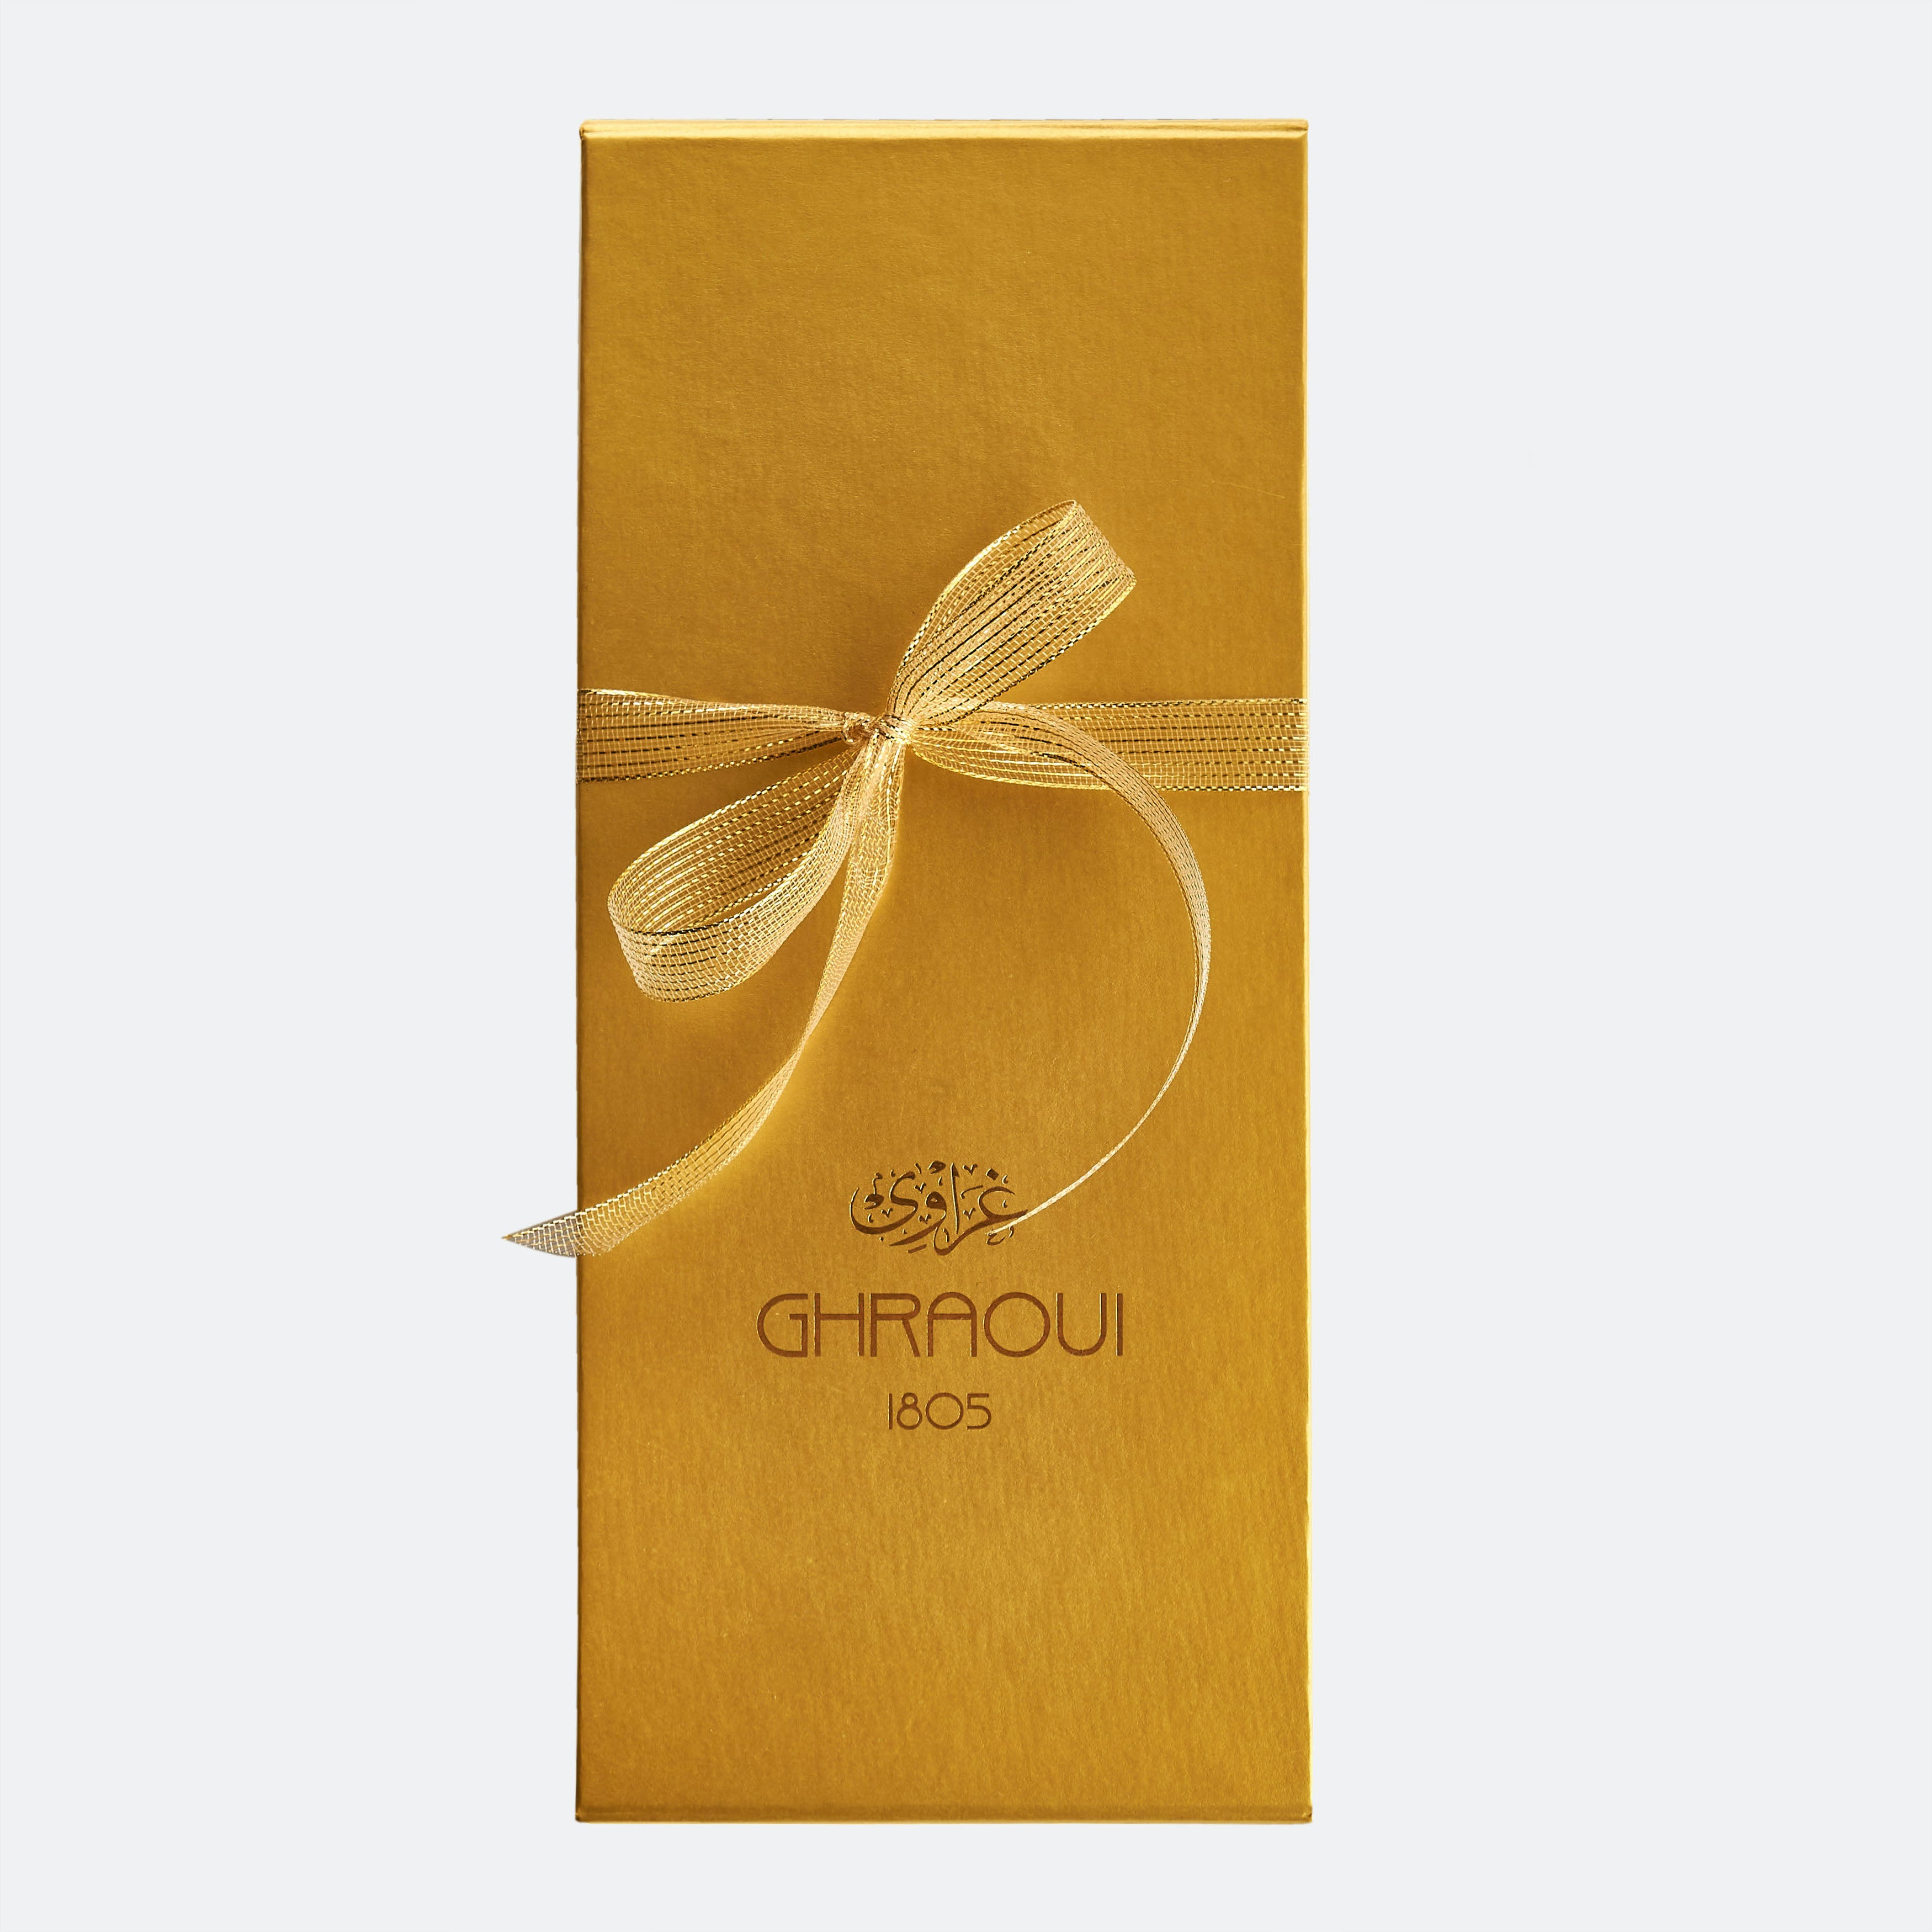 Marrons Glacé (Candied Chestnuts). Explore our chocolate gift inspiration for every occasion